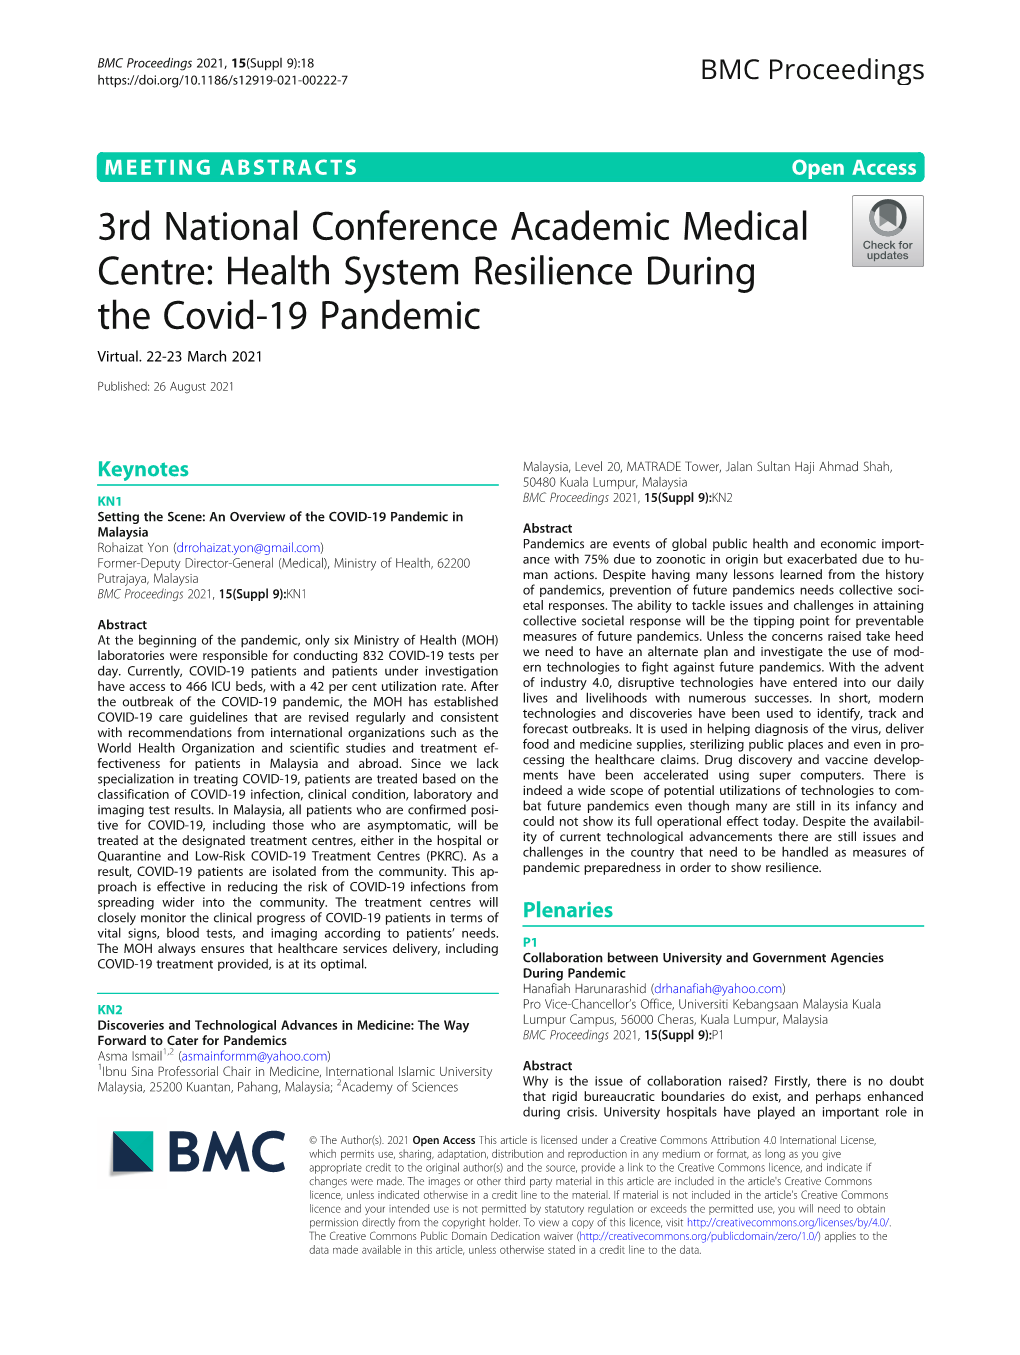 Health System Resilience During the Covid-19 Pandemic Virtual